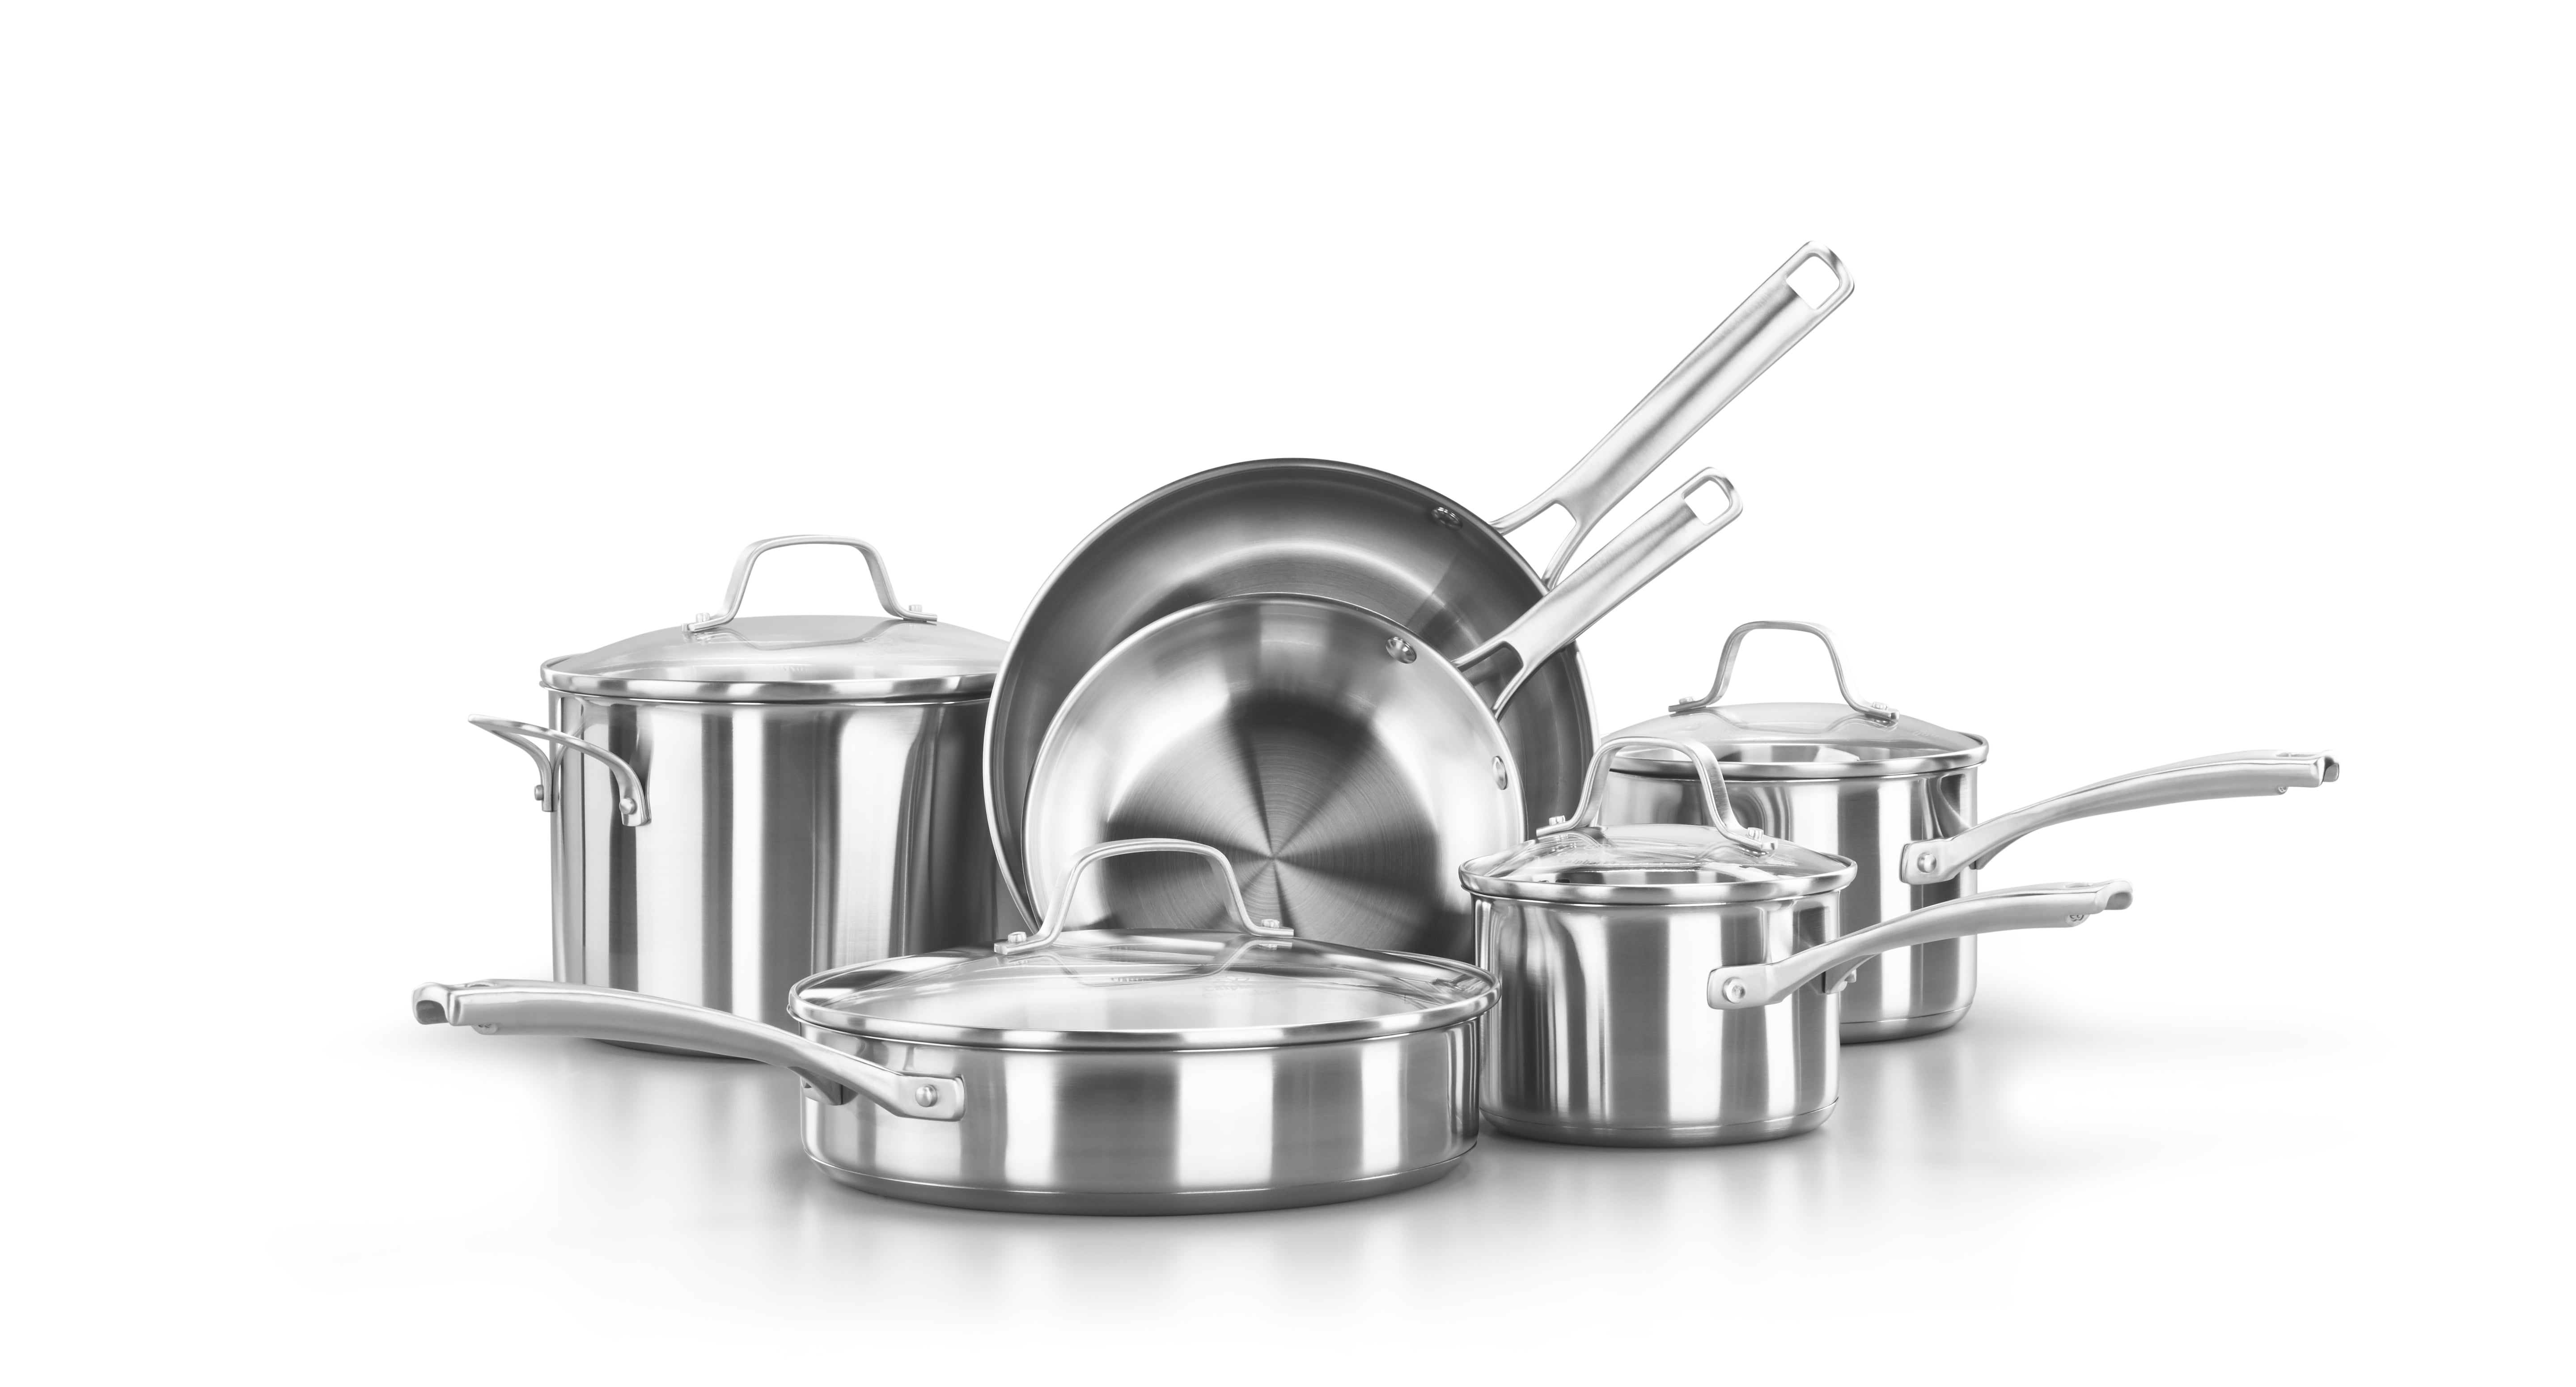 HexClad 22 Piece Hybrid Stainless Steel Cookware Set With 6 Pans, 6 Pots,  Mixing Bowls, 6 Knives and 12 Inch Griddle, Dishwasher Safe